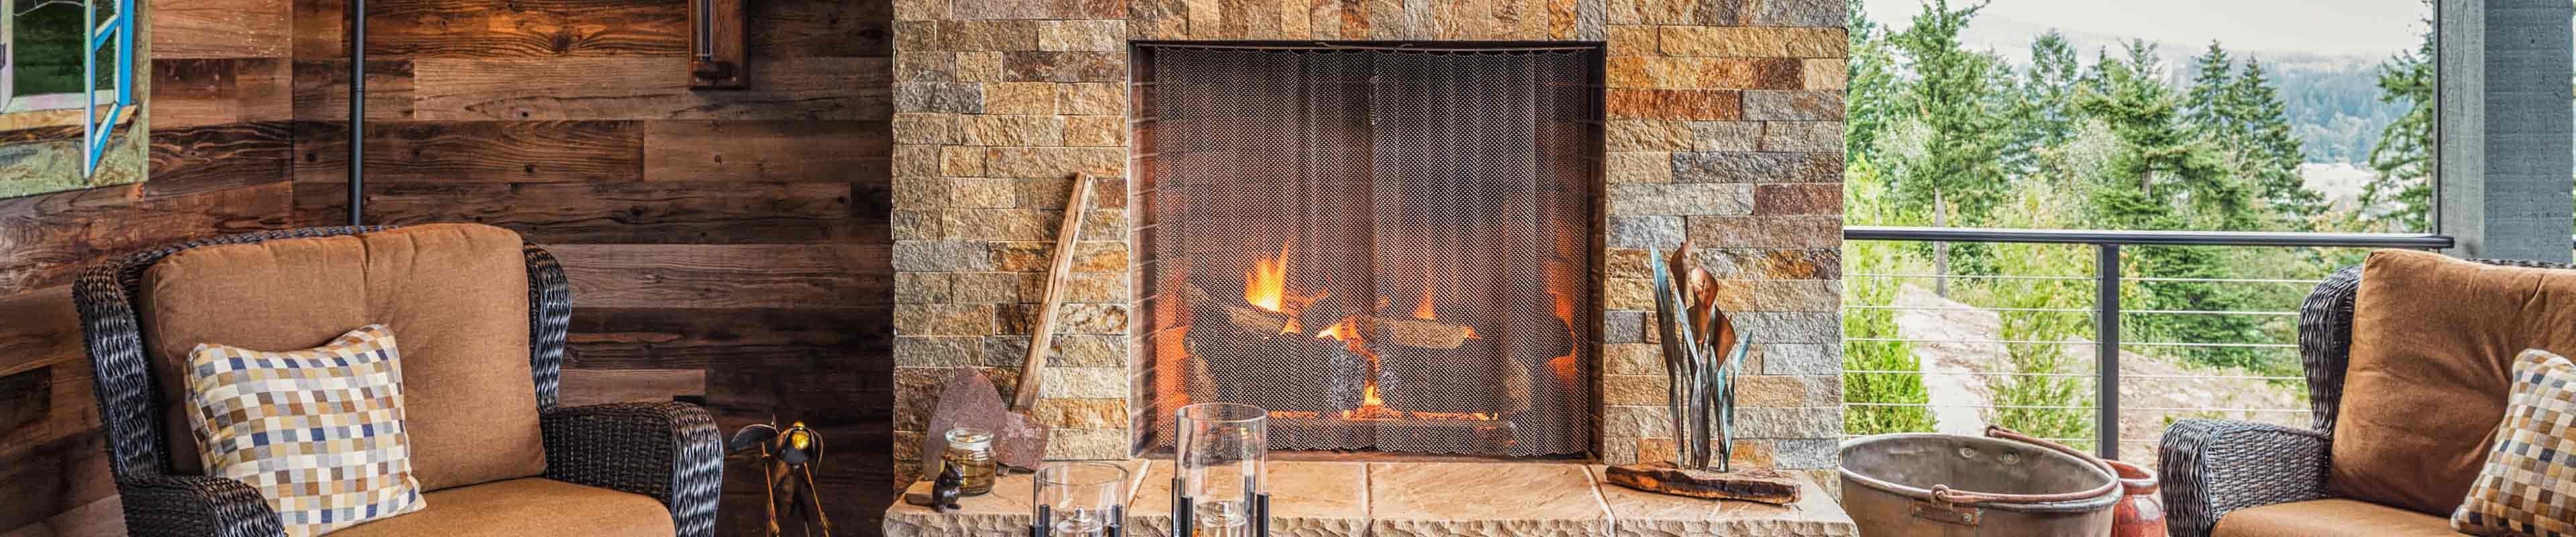 Image of a home fireplace on a cold winter day.